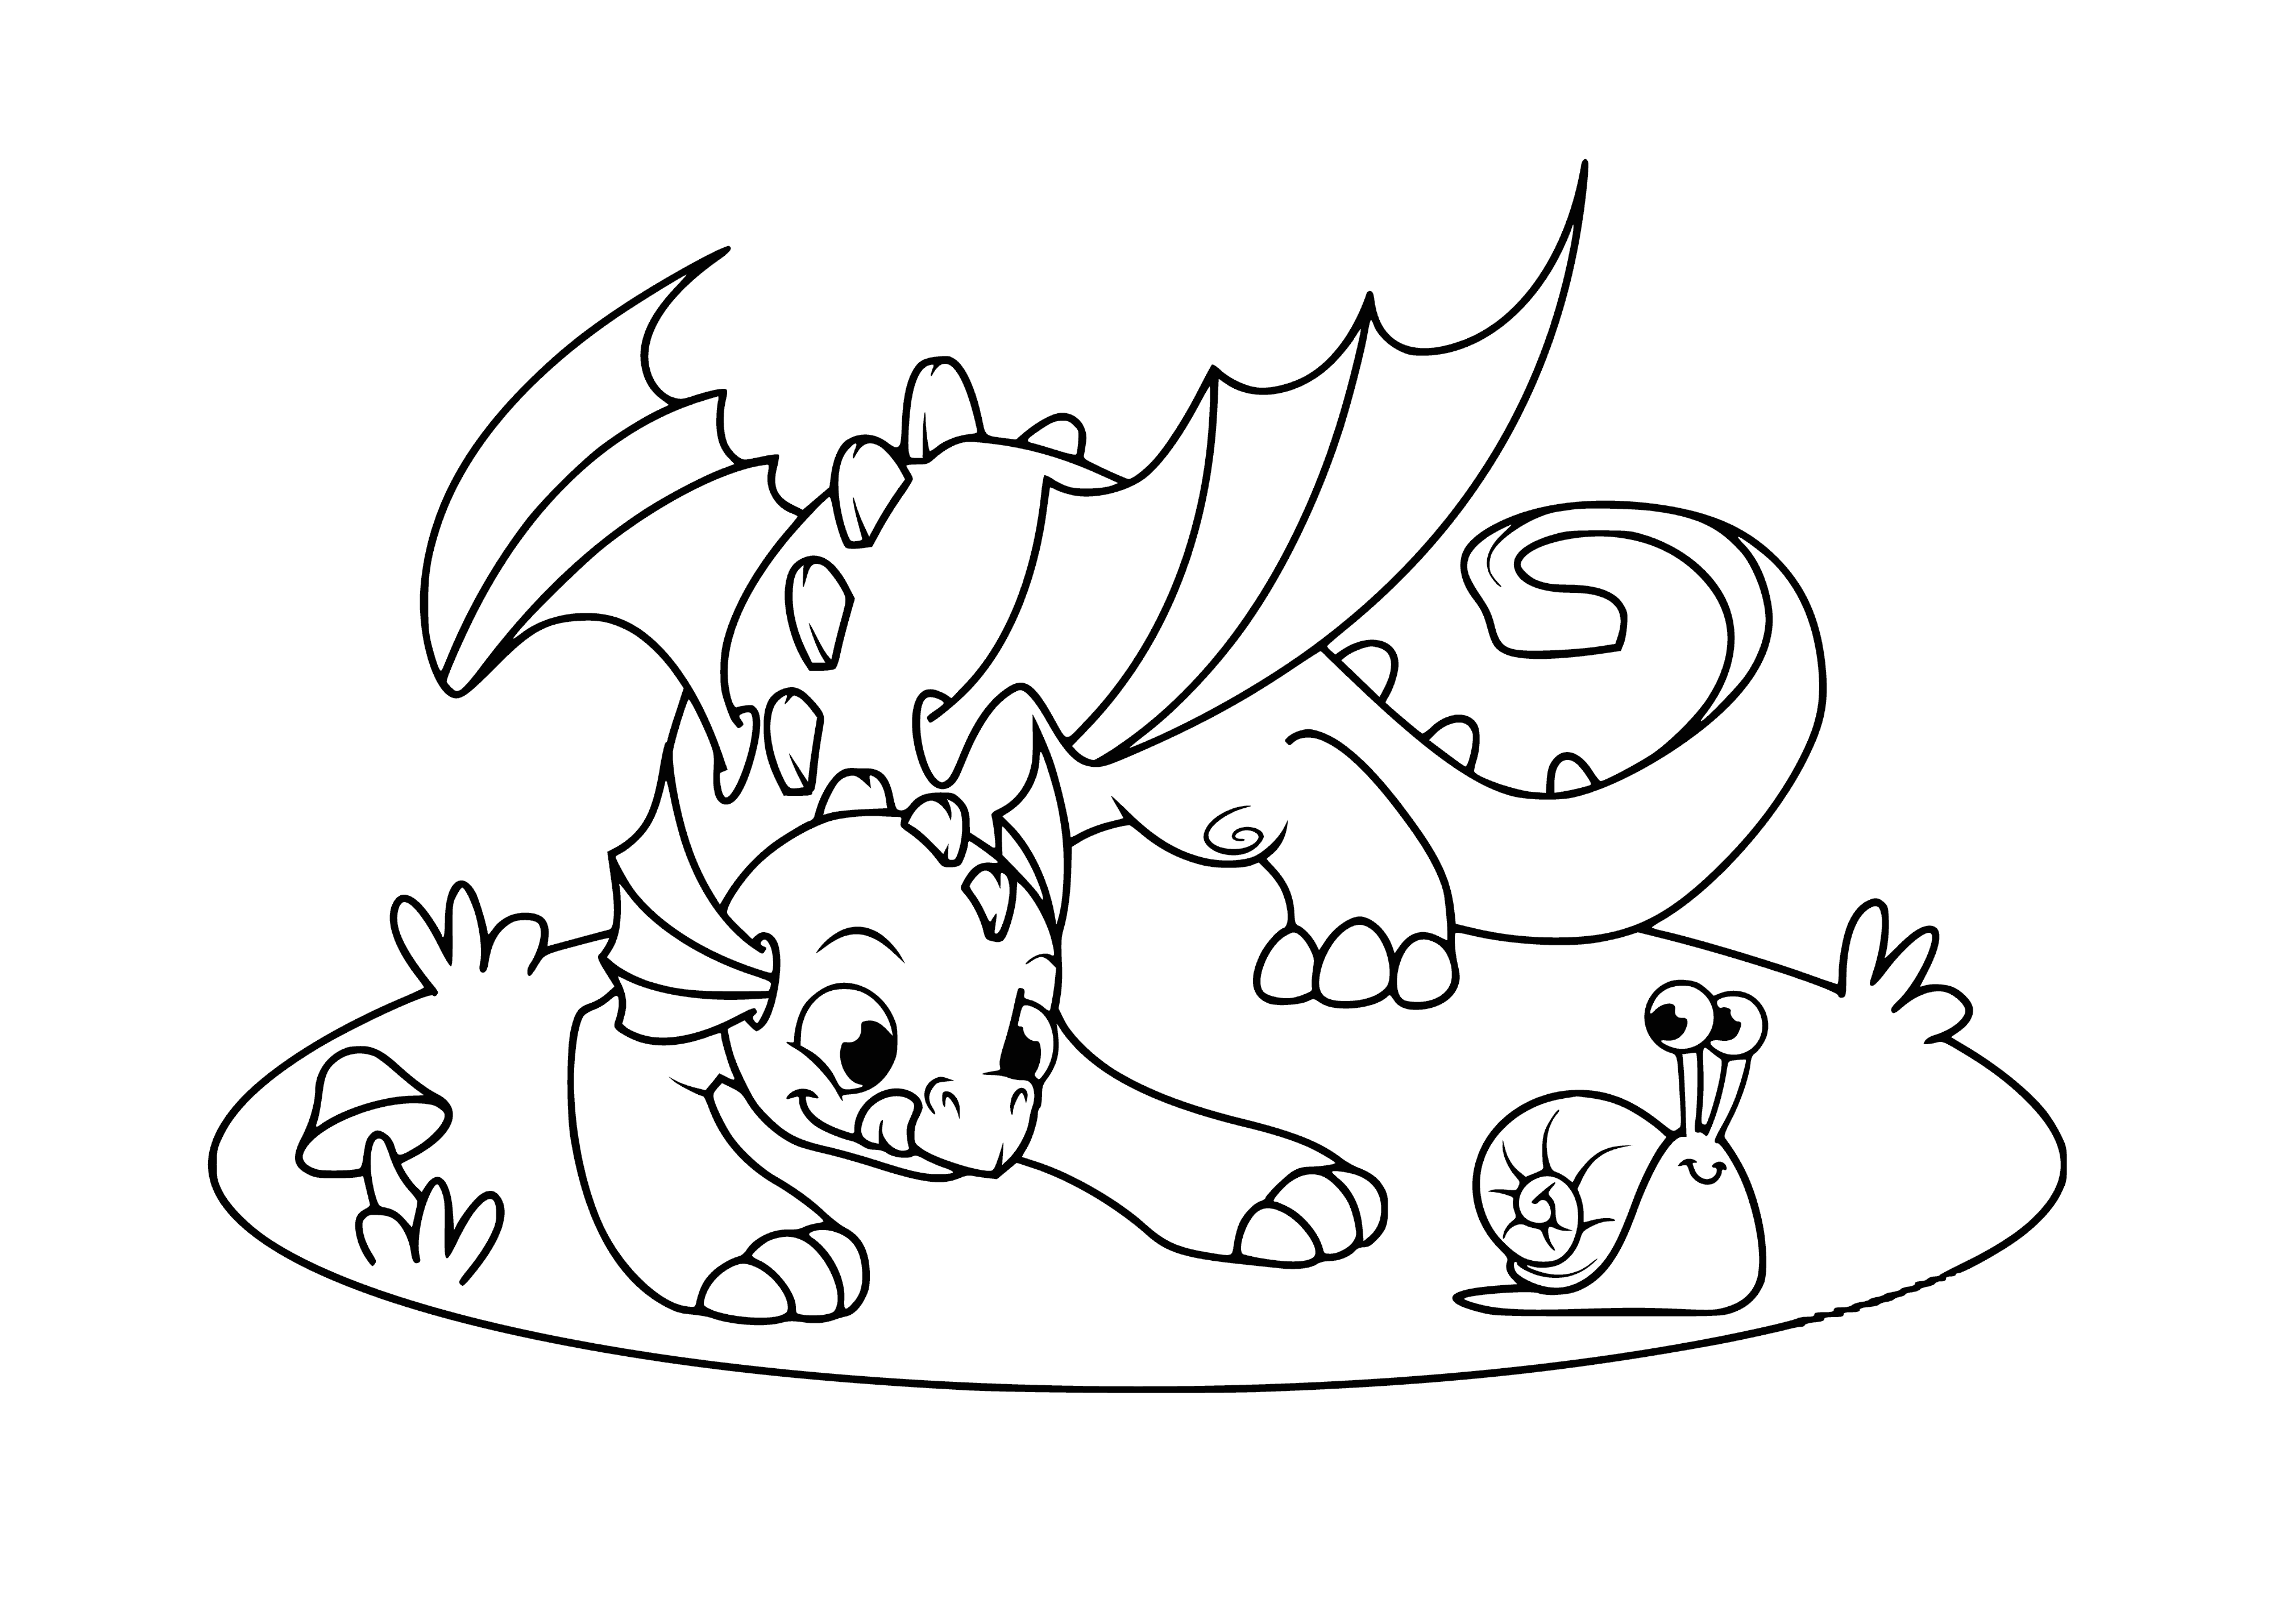 coloring page: Dragon playing with snail: crawls on ground, small wings, blue, long tail.